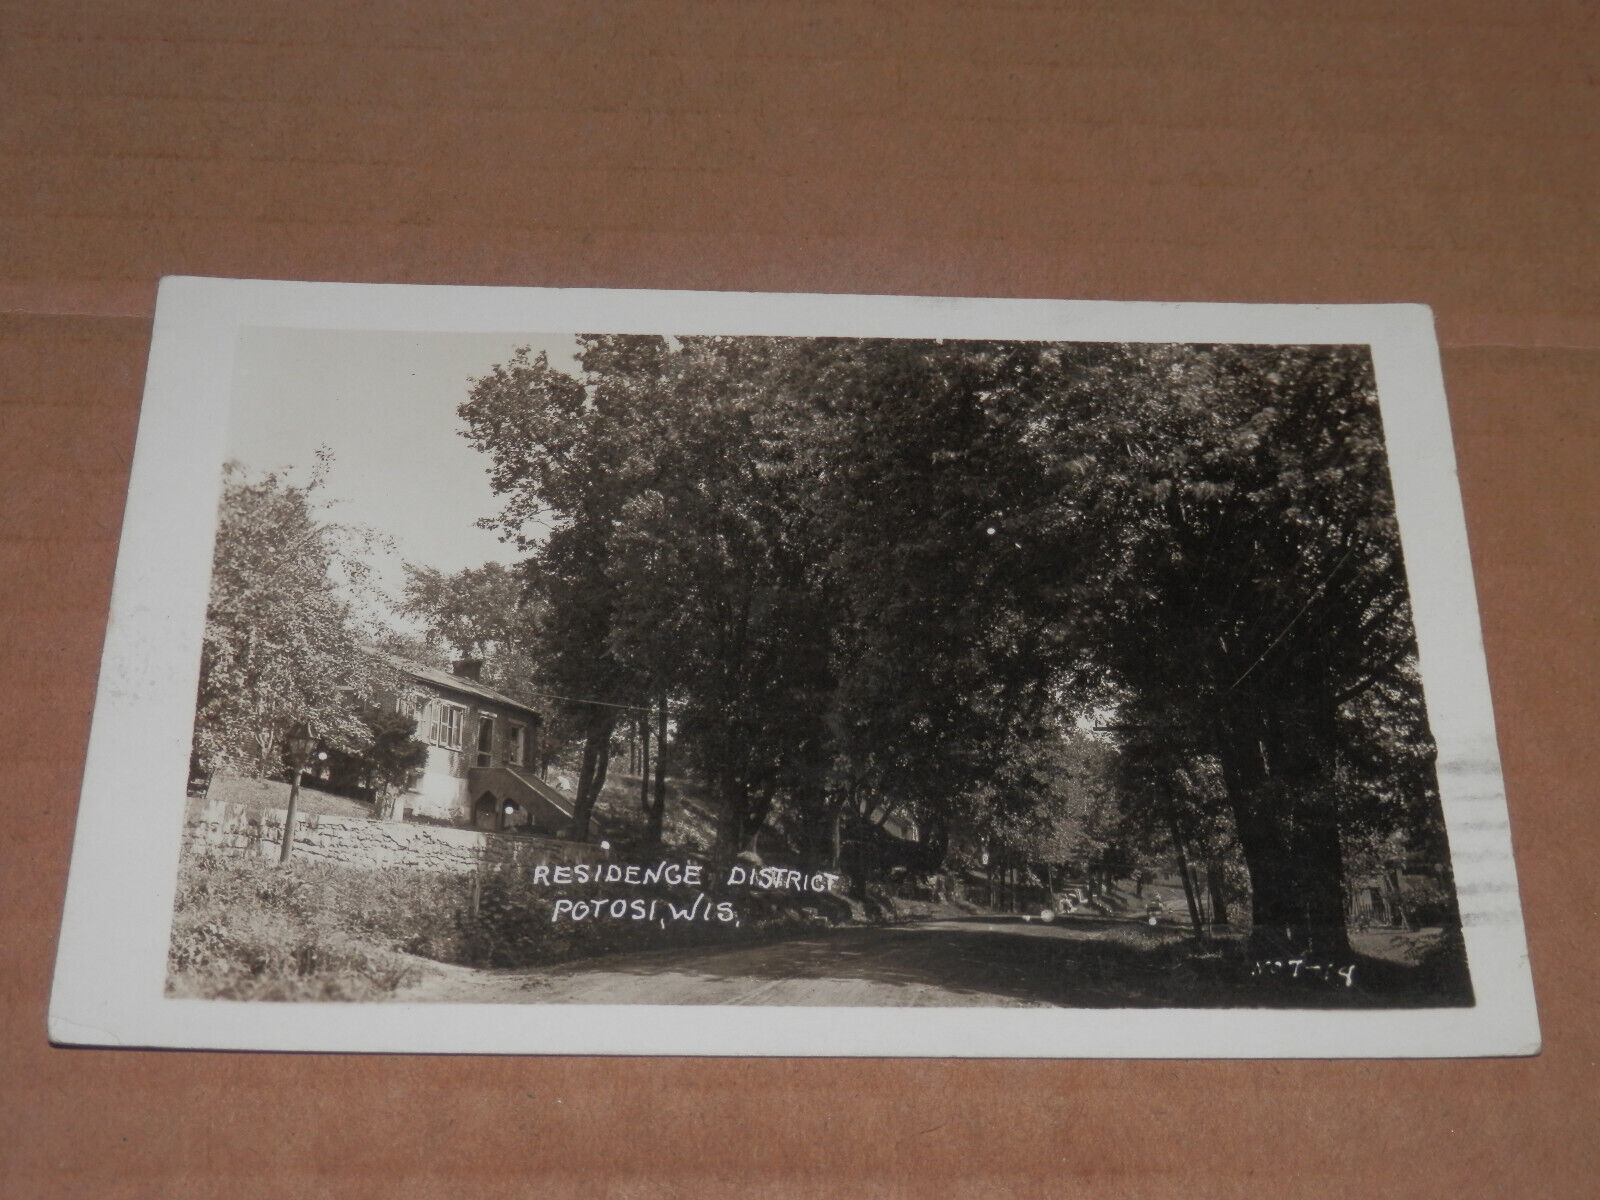 POTOSI WISCONSIN - 1920 USED REAL PHOTO POSTCARD - RESIDENCE DISTRICT  GRANT CO.